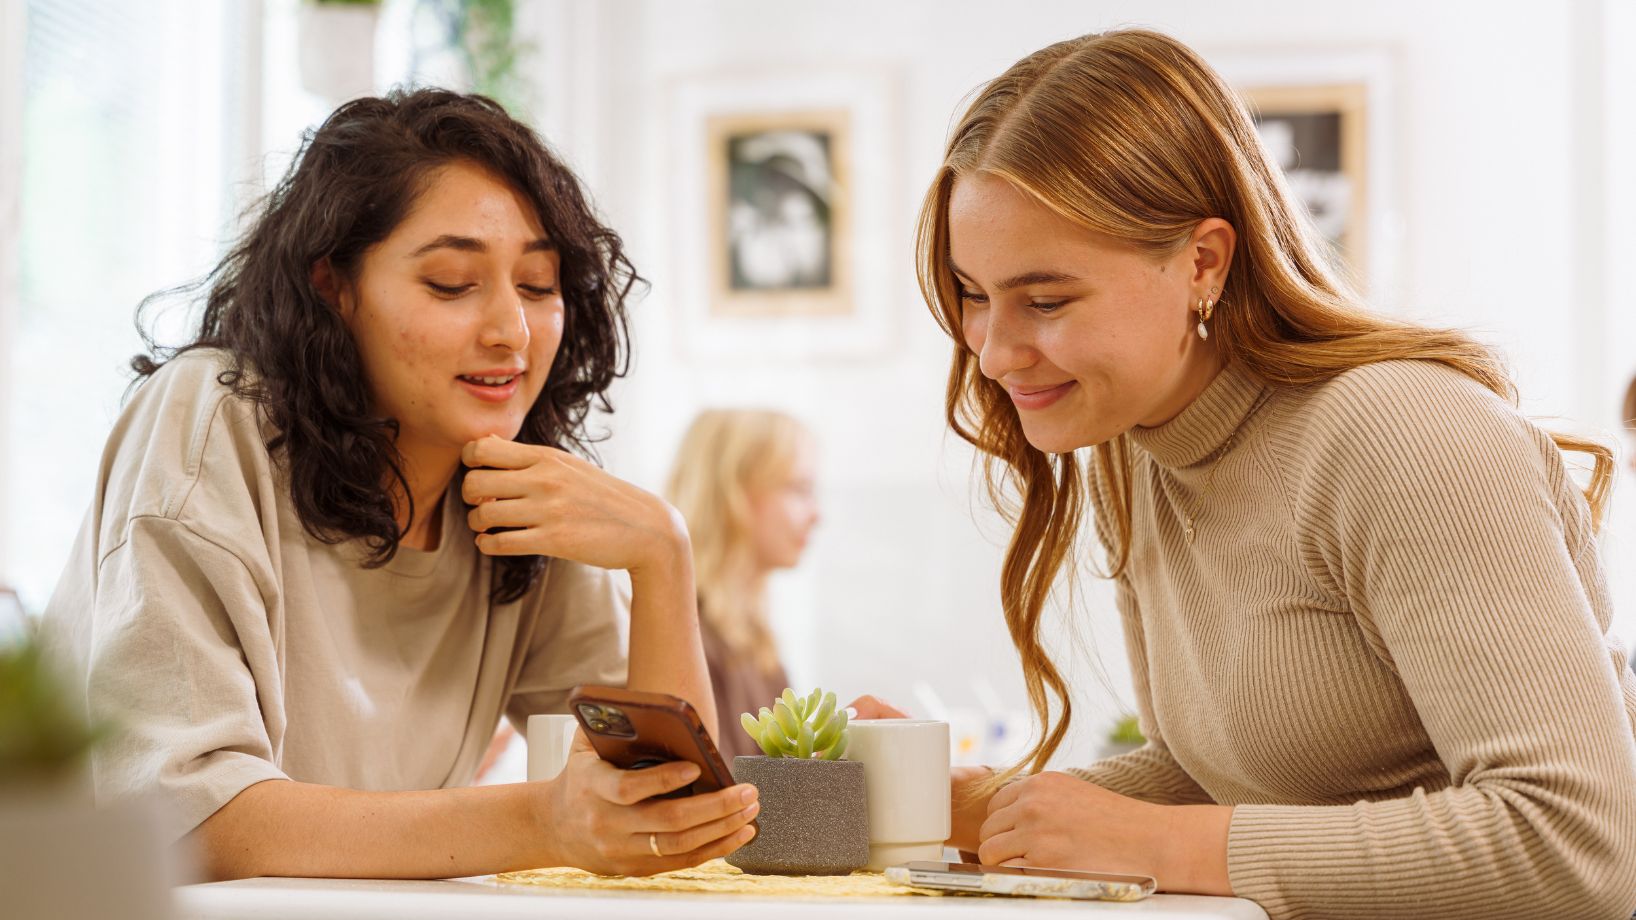 two young women sitting at a table looking at something on a phone screen